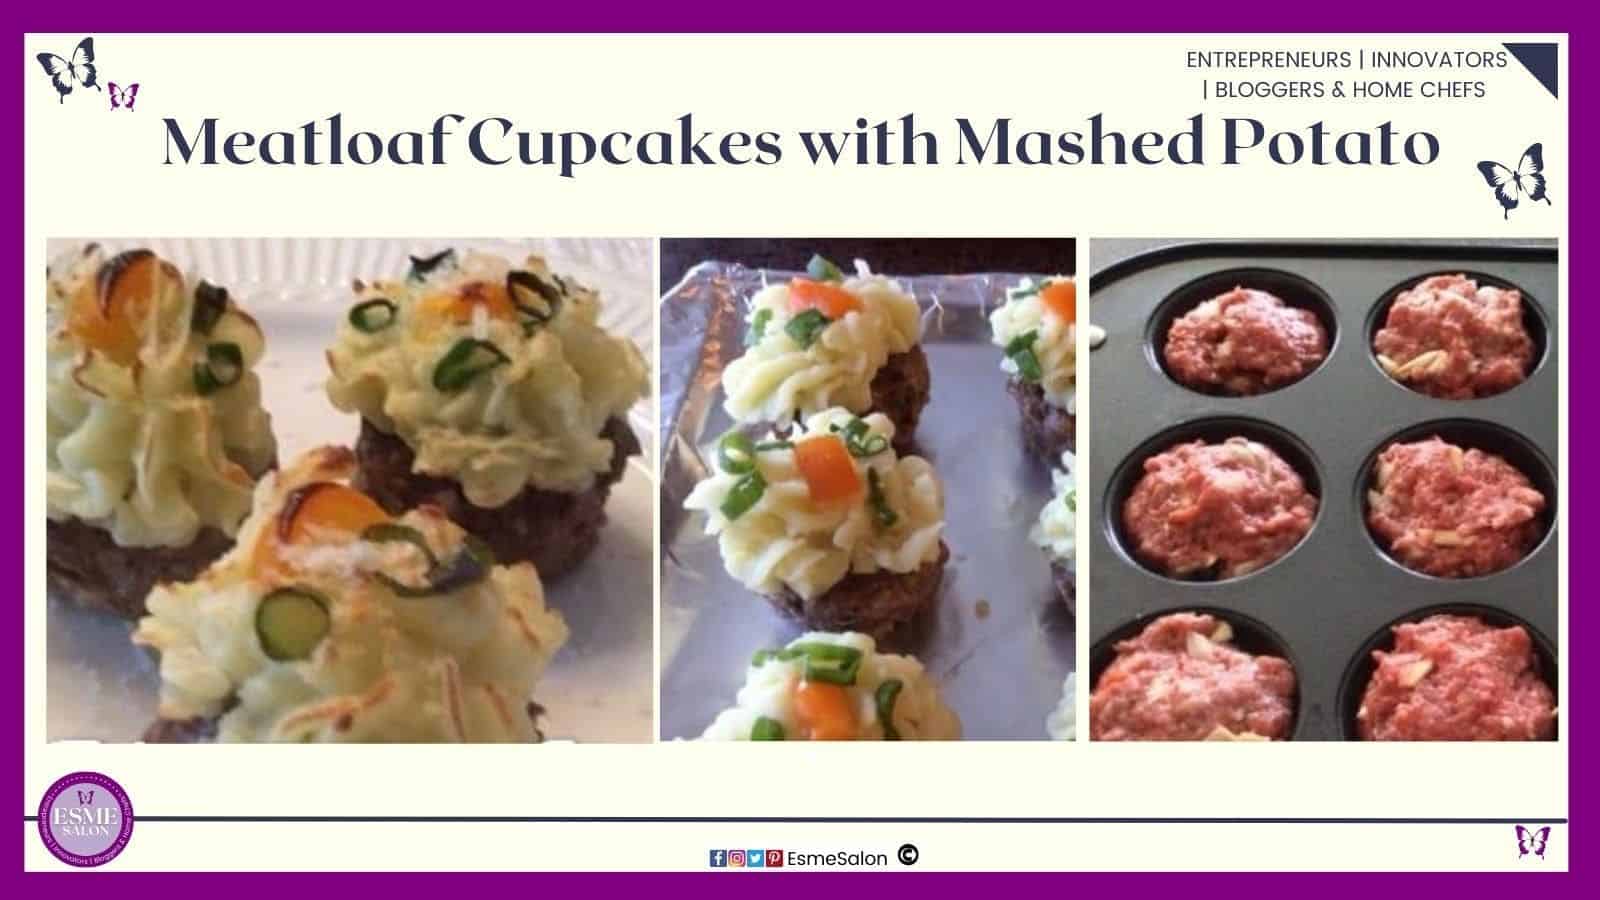 an image of a single Meatloaf Cupcakes topped with Mashed Potato and fresh dill as well as 12 raw in a cupcake pan ready to be baked